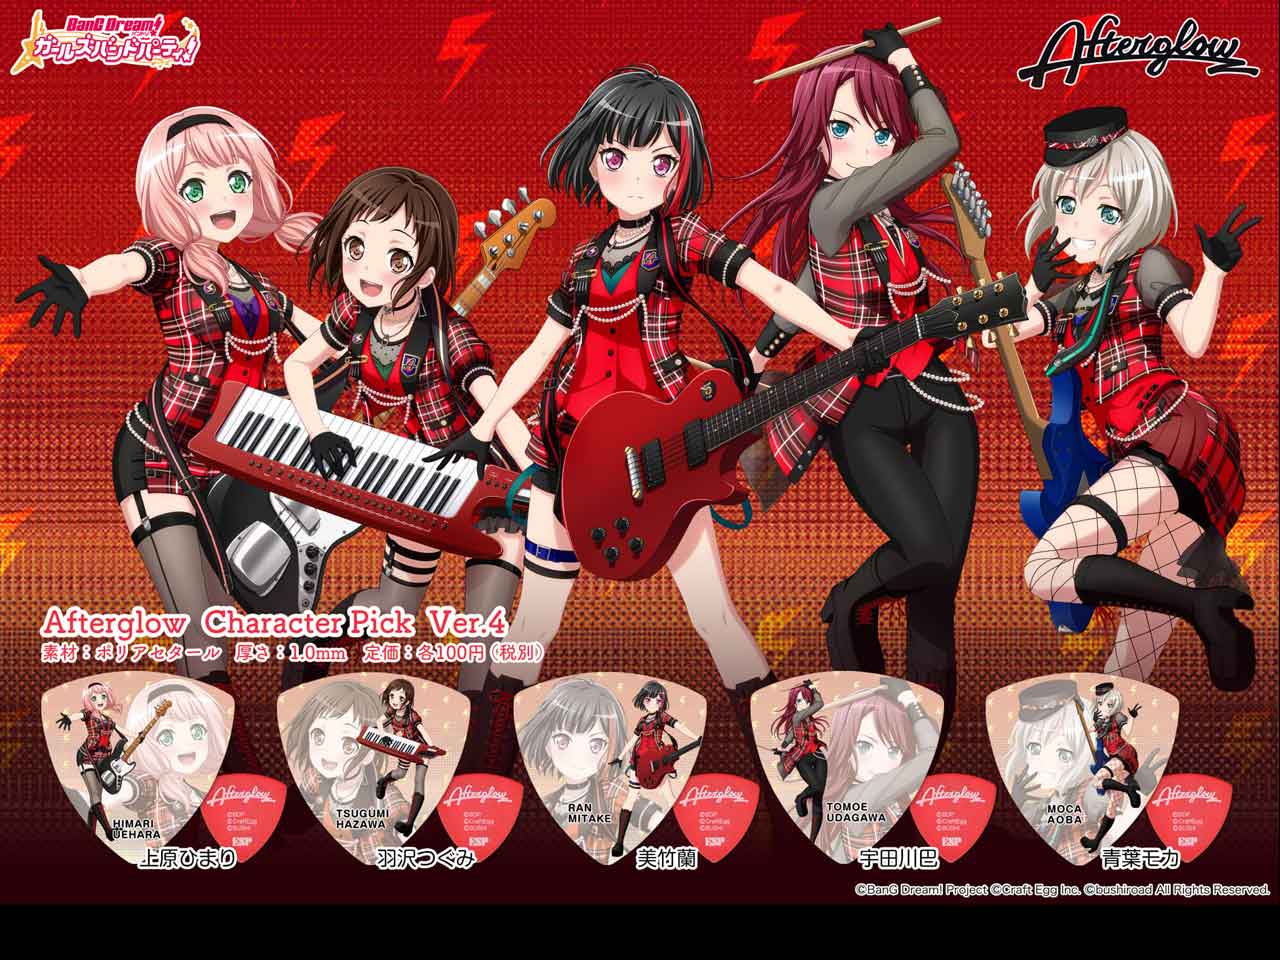 【ESP×BanG Dream!コラボピック】Afterglow Character Pick Ver.4 "羽沢つぐみ"（GBP TSUGUMI AFTERGLOW 4）＆”ハメパチ” セット